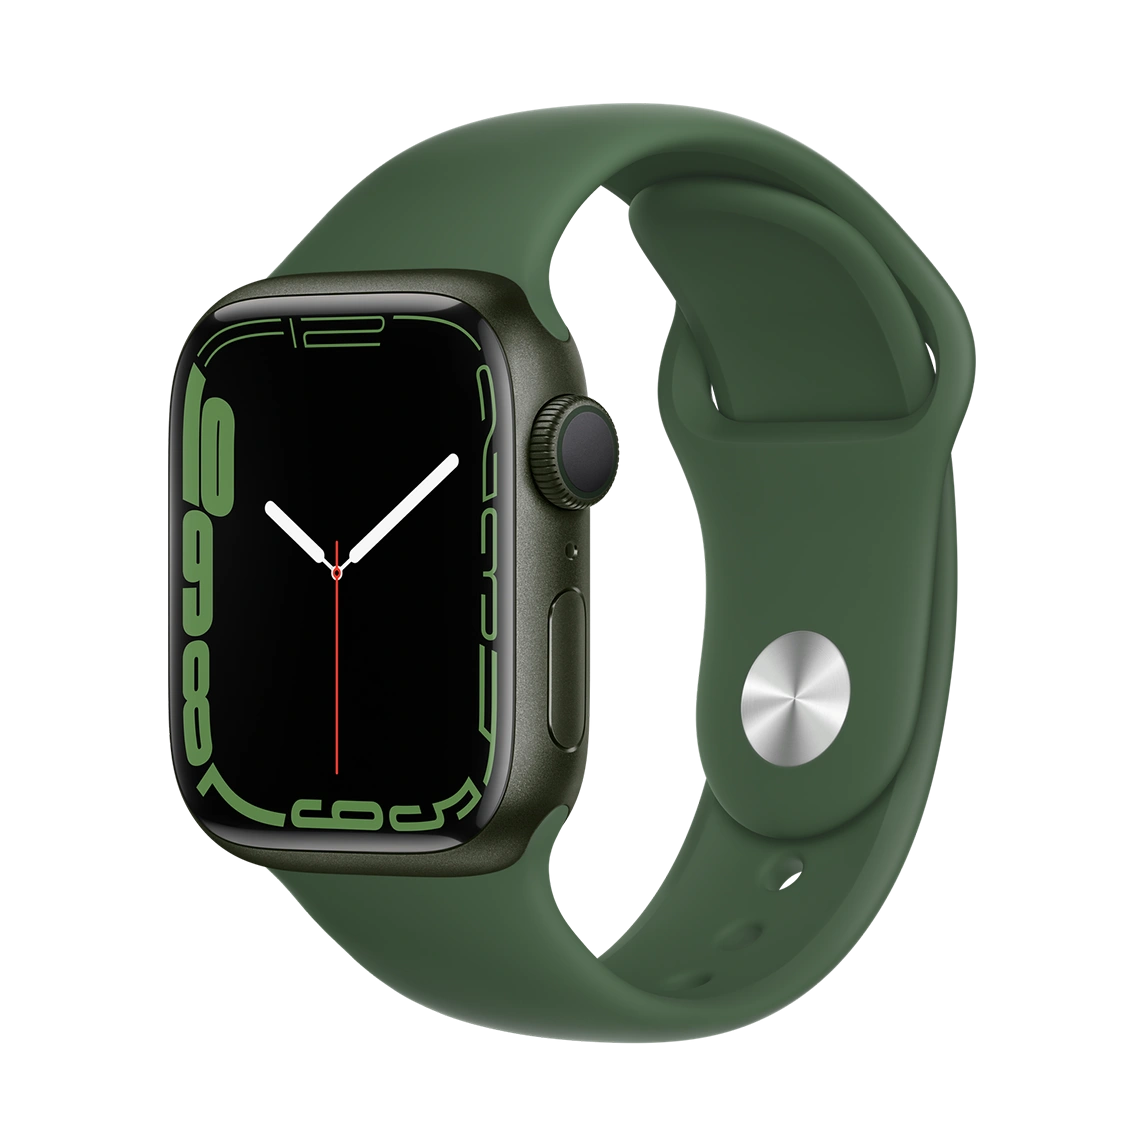 Apple Watch Series 7 Green Aluminum Case with Clover Silicone Band